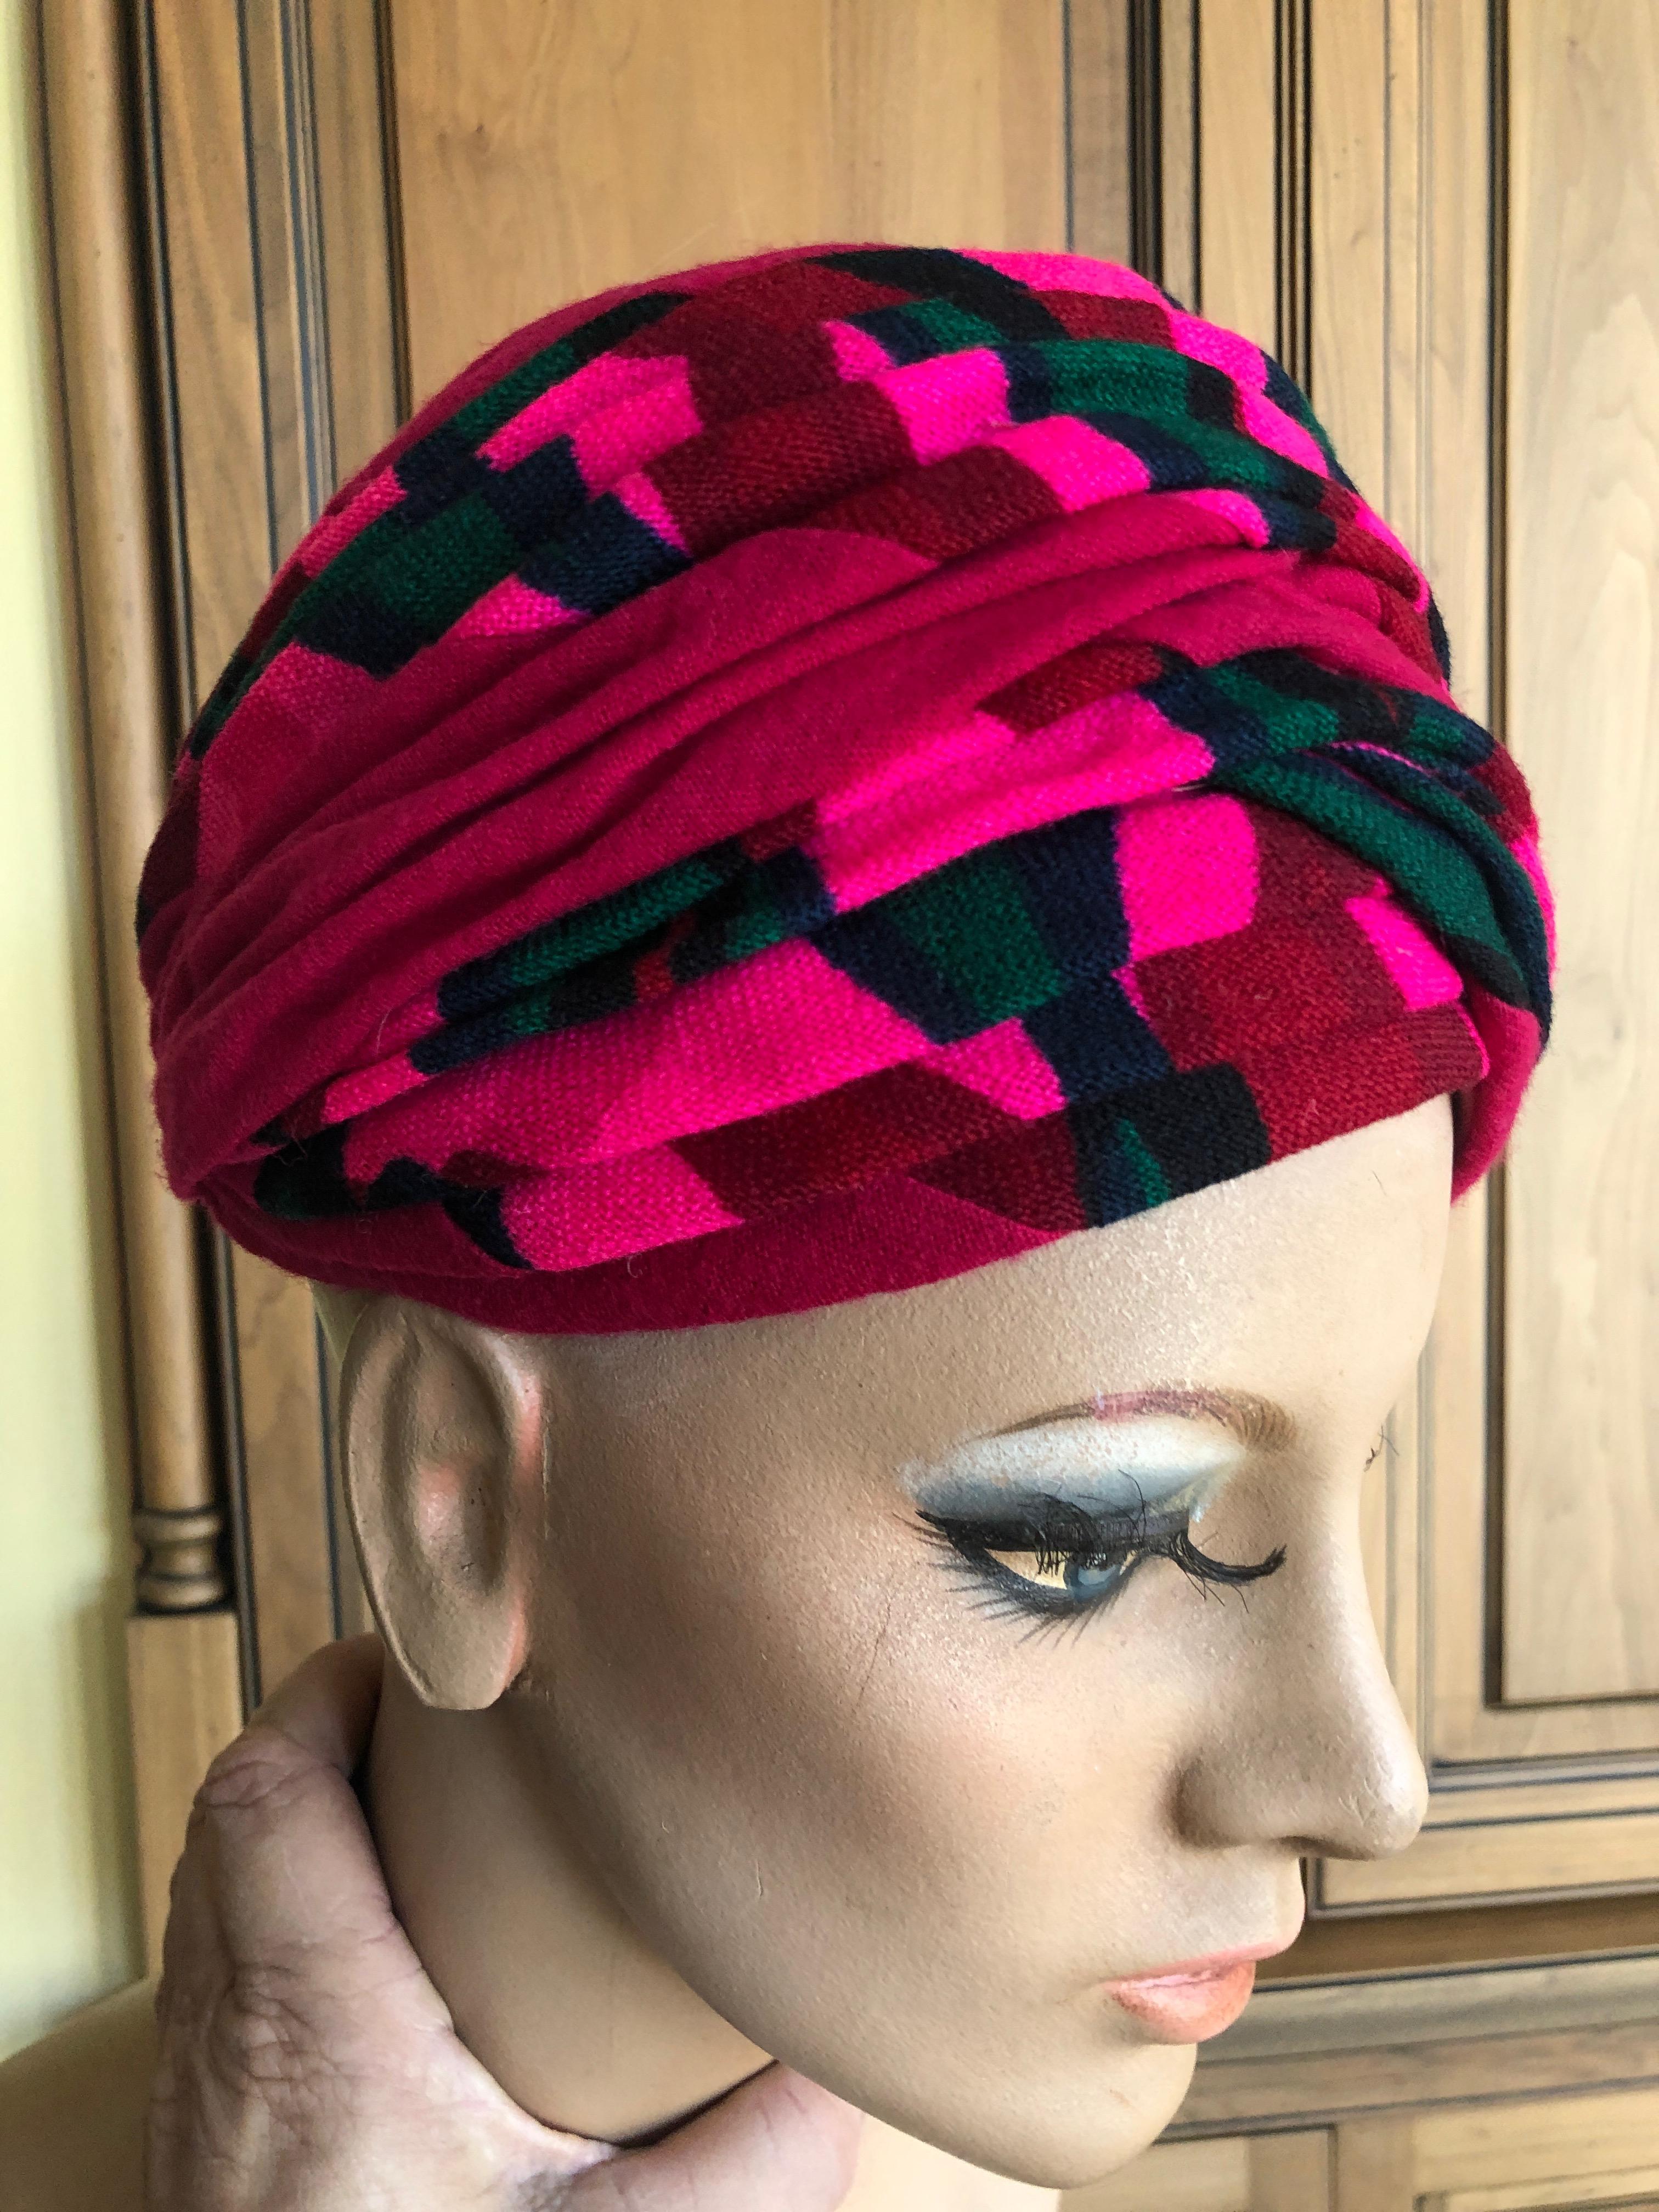 Christian Dior Chapeaux Colorful 60's Turban  
22.5 inch circumfrence.
In excellent condition